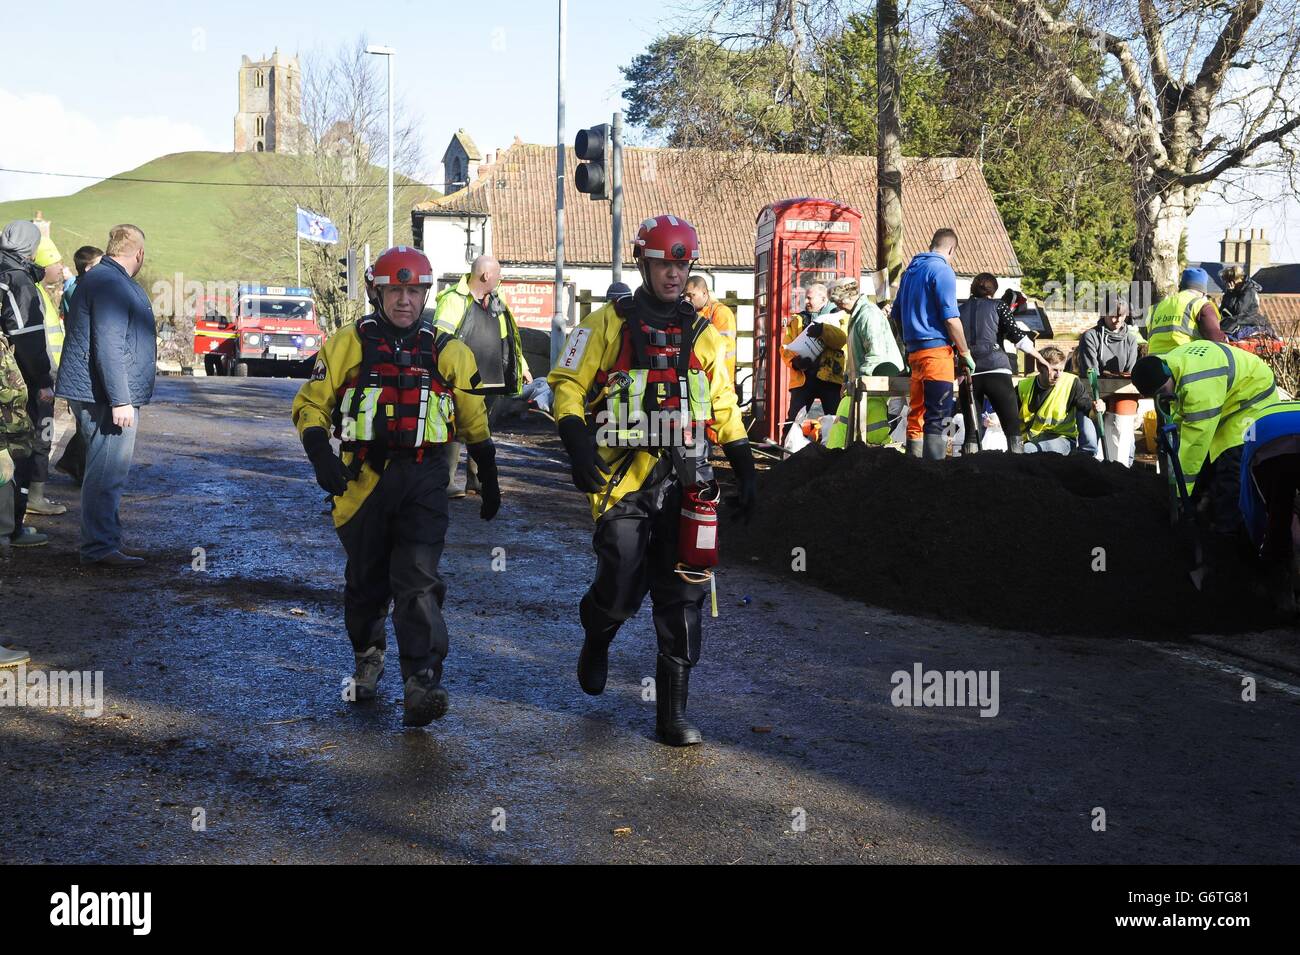 Members of Devon and Somerset Fire and Rescue service help with the flooding in Burrowbridge, Somerset. Stock Photo